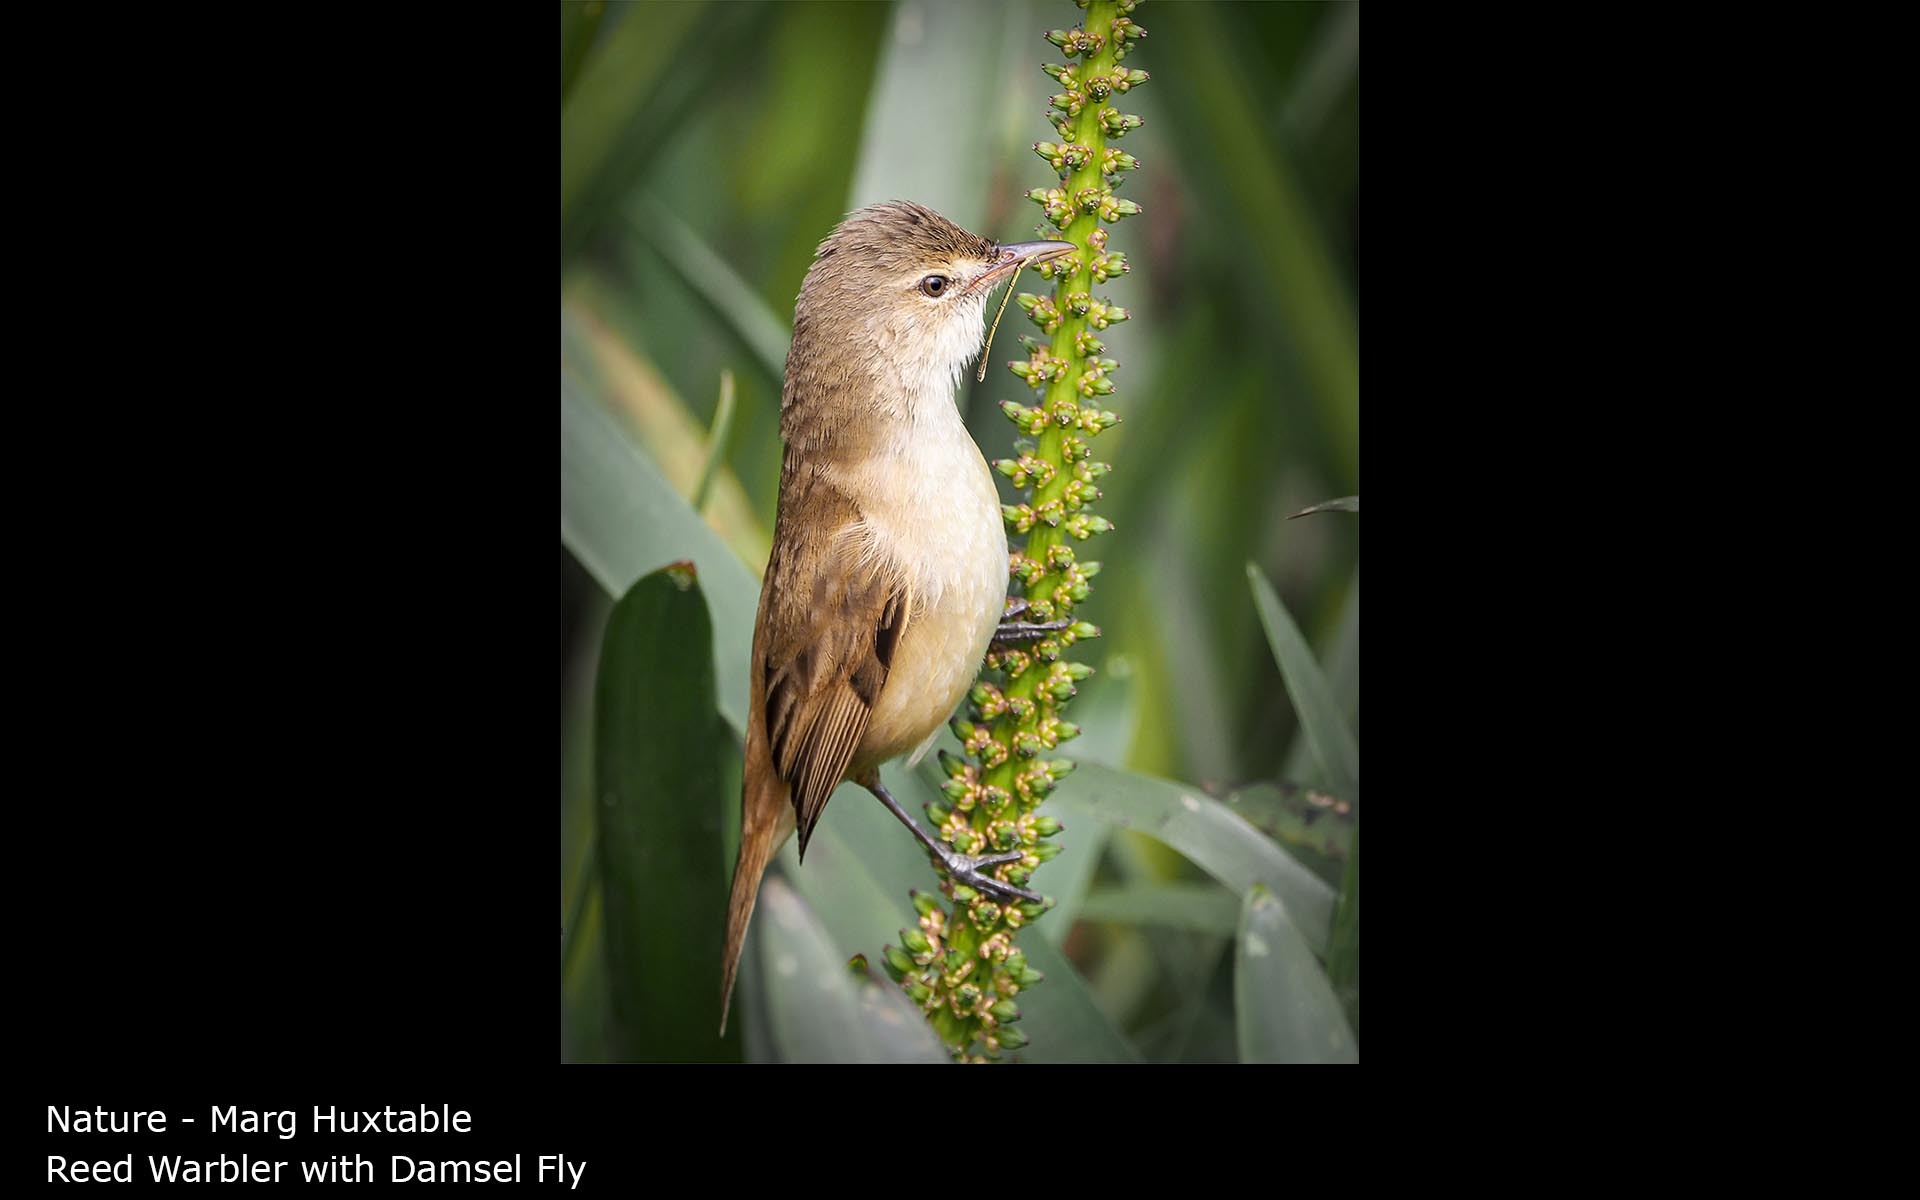 Reed Warbler with Damsel Fly - Marg Huxtable